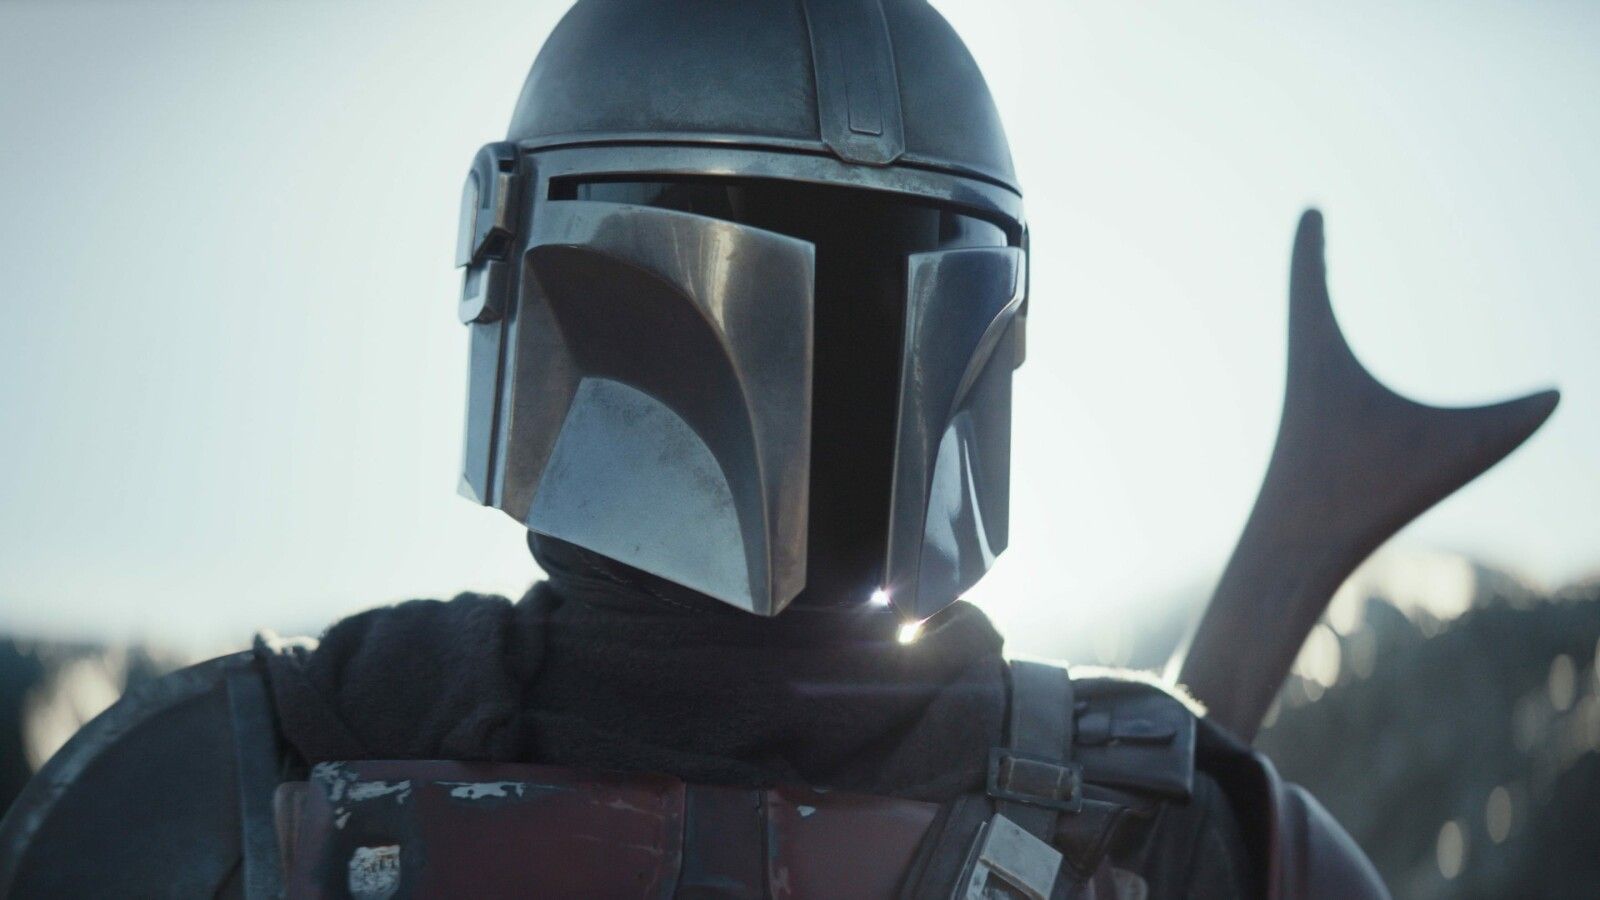 Mandalorian: Season 2 is coming, with the role of Star Wars Rebels